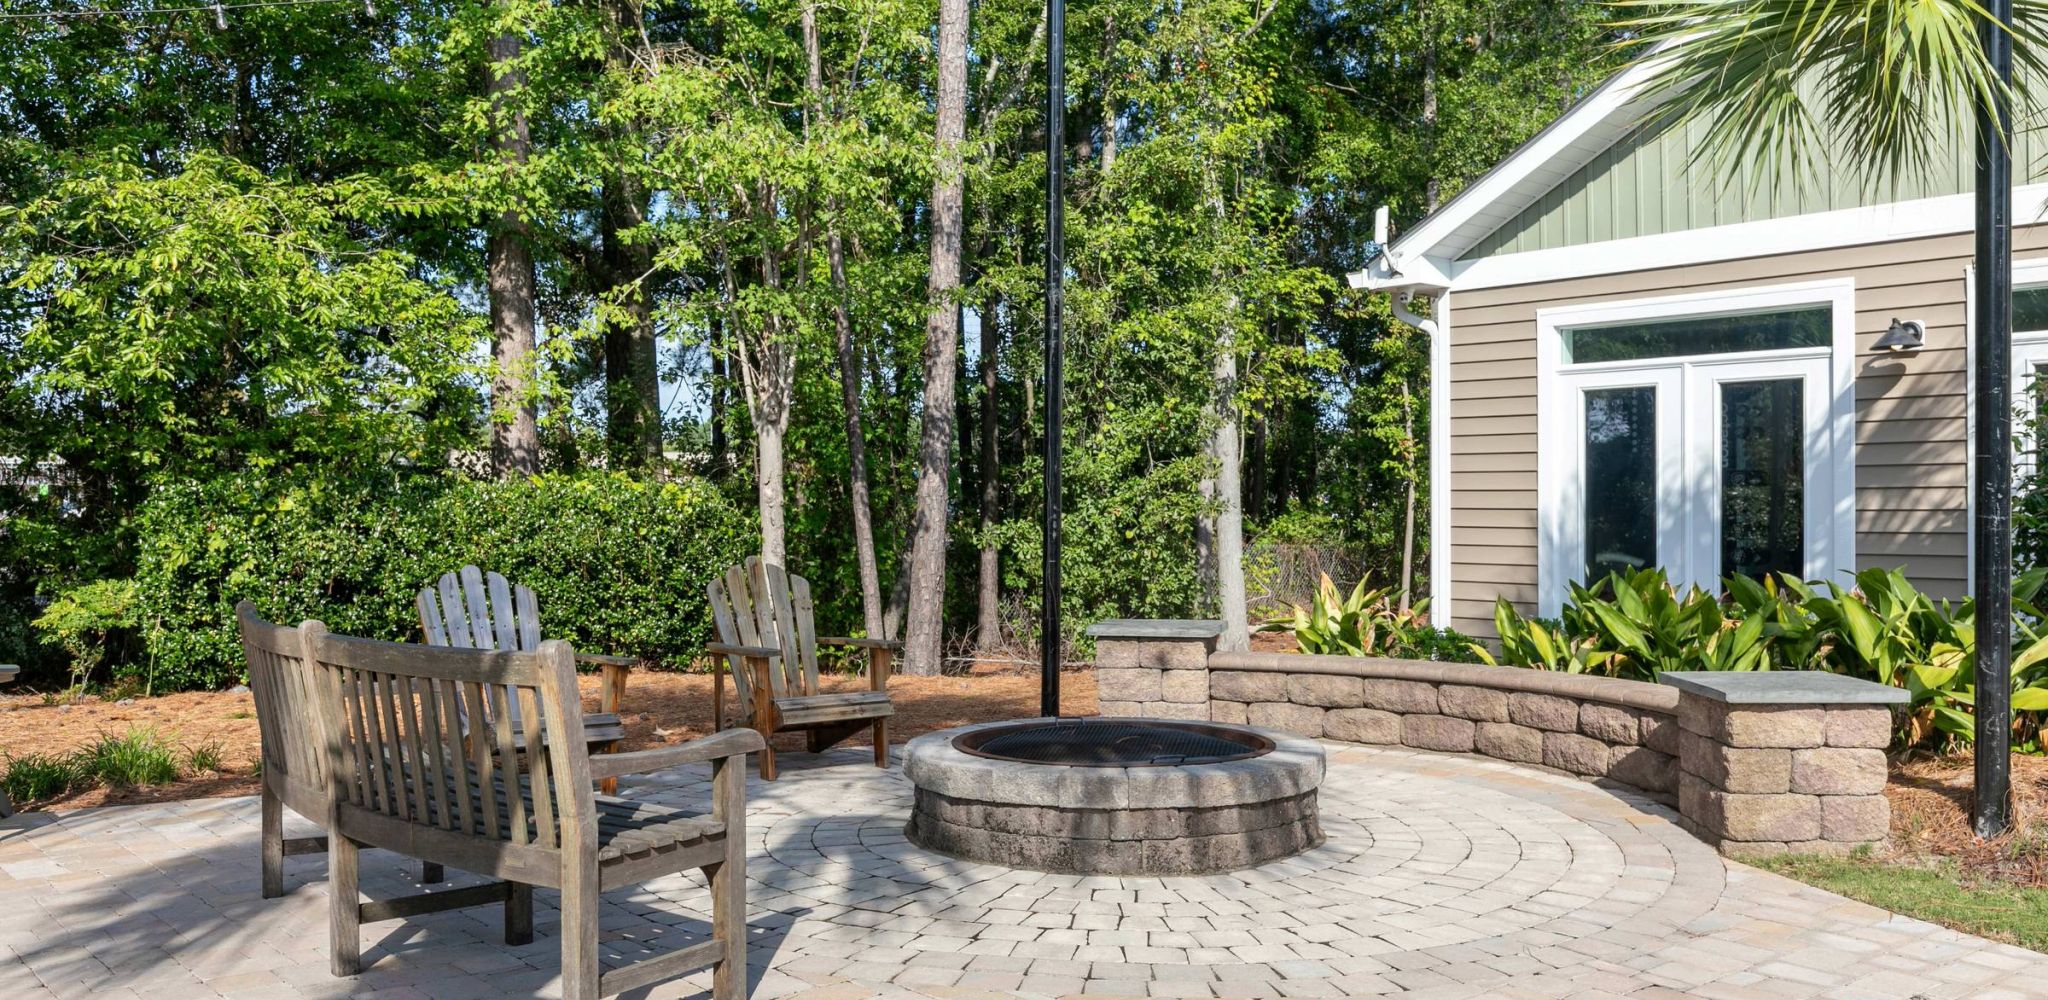 Hawthorne at Murrayville outdoor patio area with wooden chairs, a fire pit, and lush greenery surrounding the space